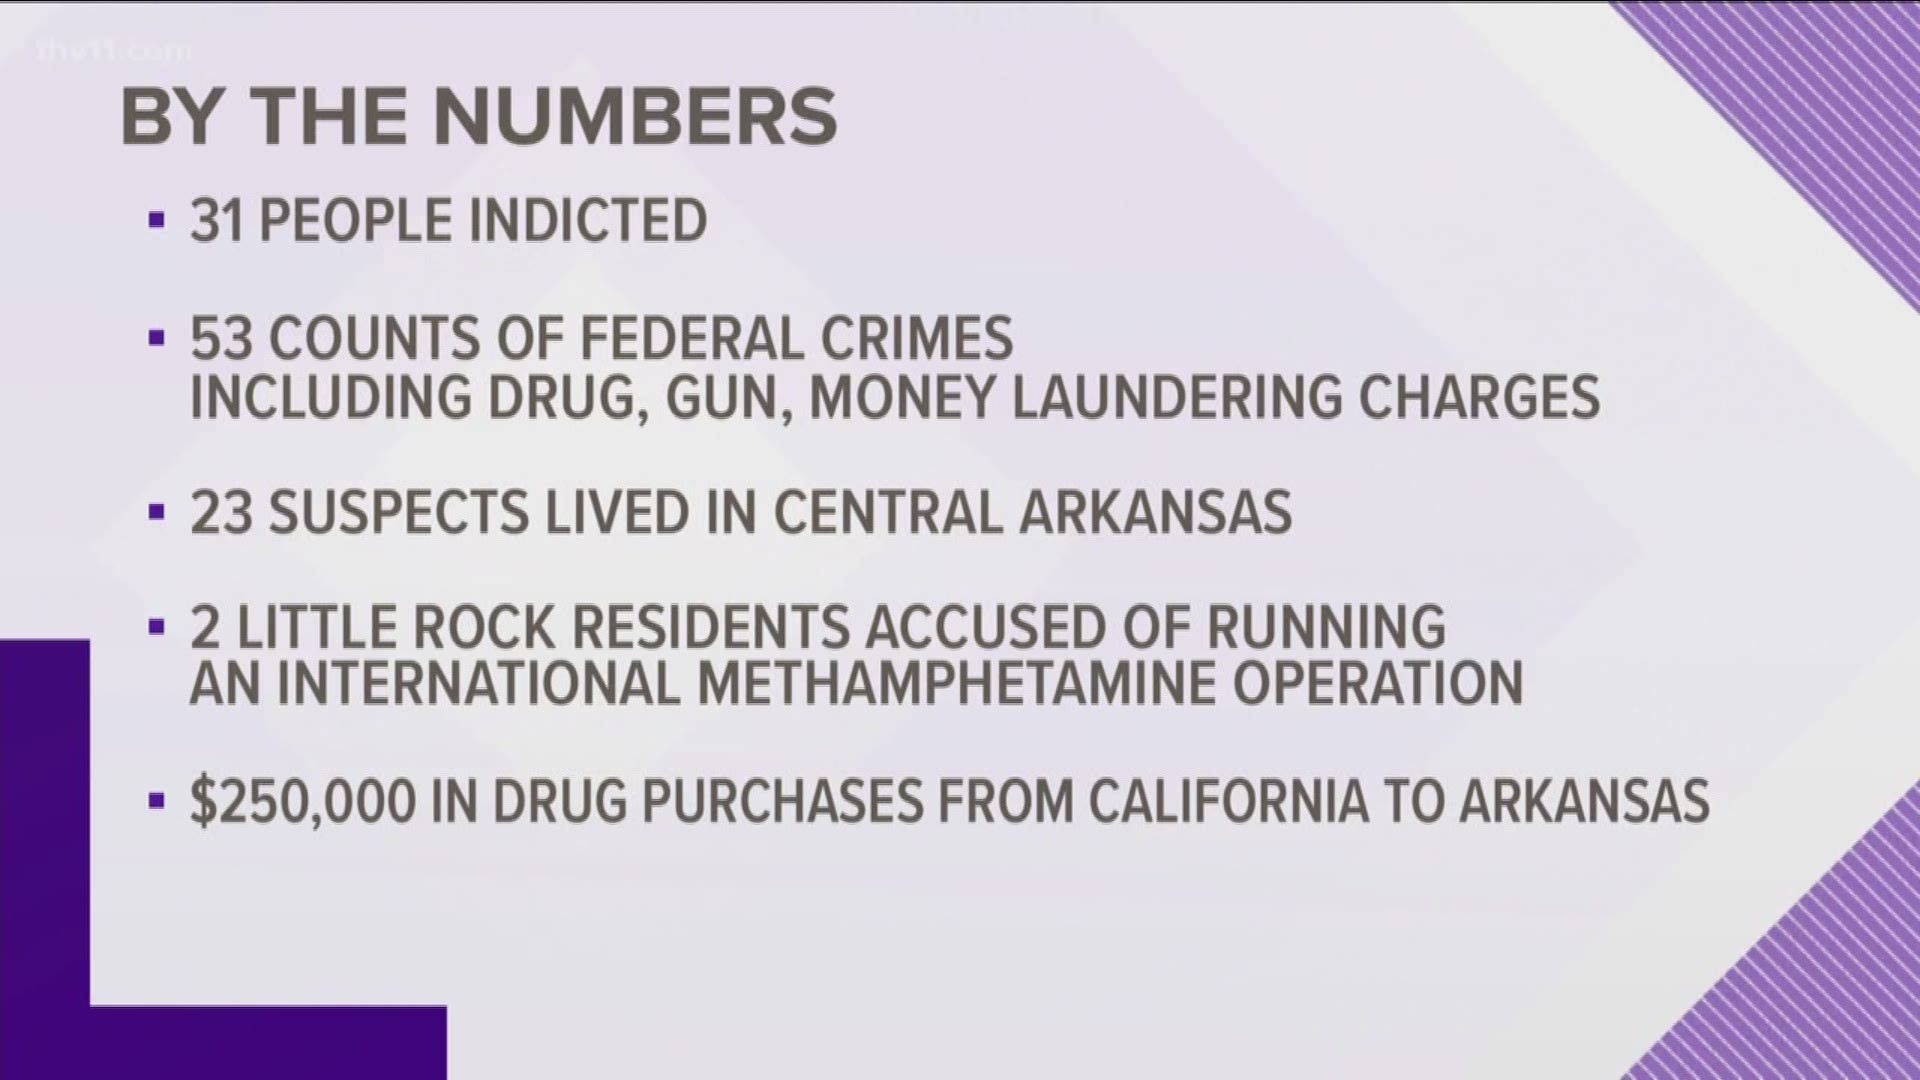 This comes after a federal grand jury in Little Rock charged the suspects with drug, gun and money laundering crimes.